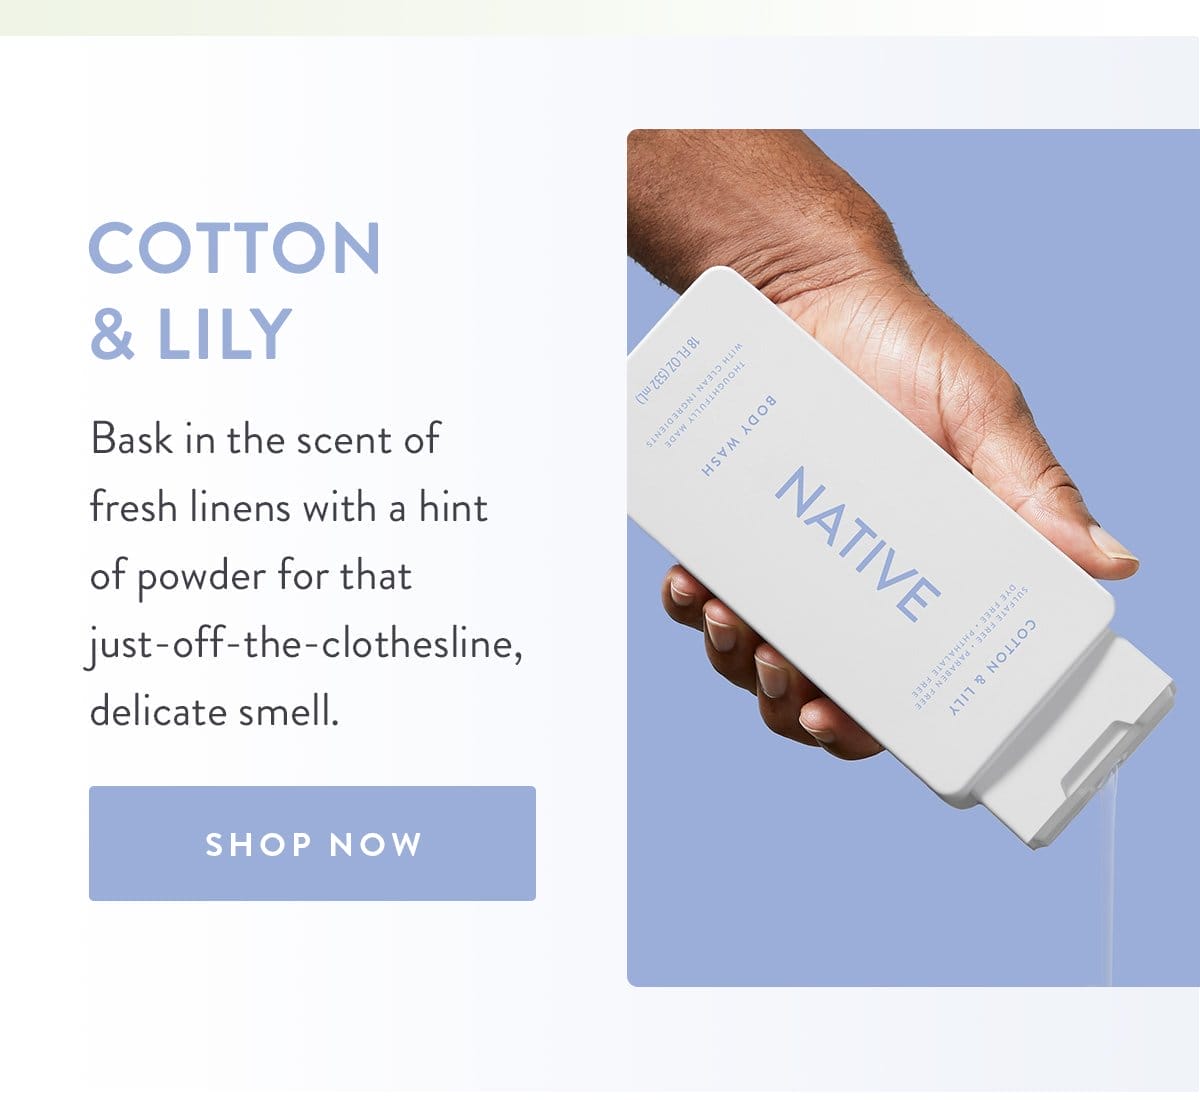 Cotton & Lily | Bask in the scent of fresh linens with a hint of powder for that just-off-the-clothesline, delicate smell. | SHOP NOW